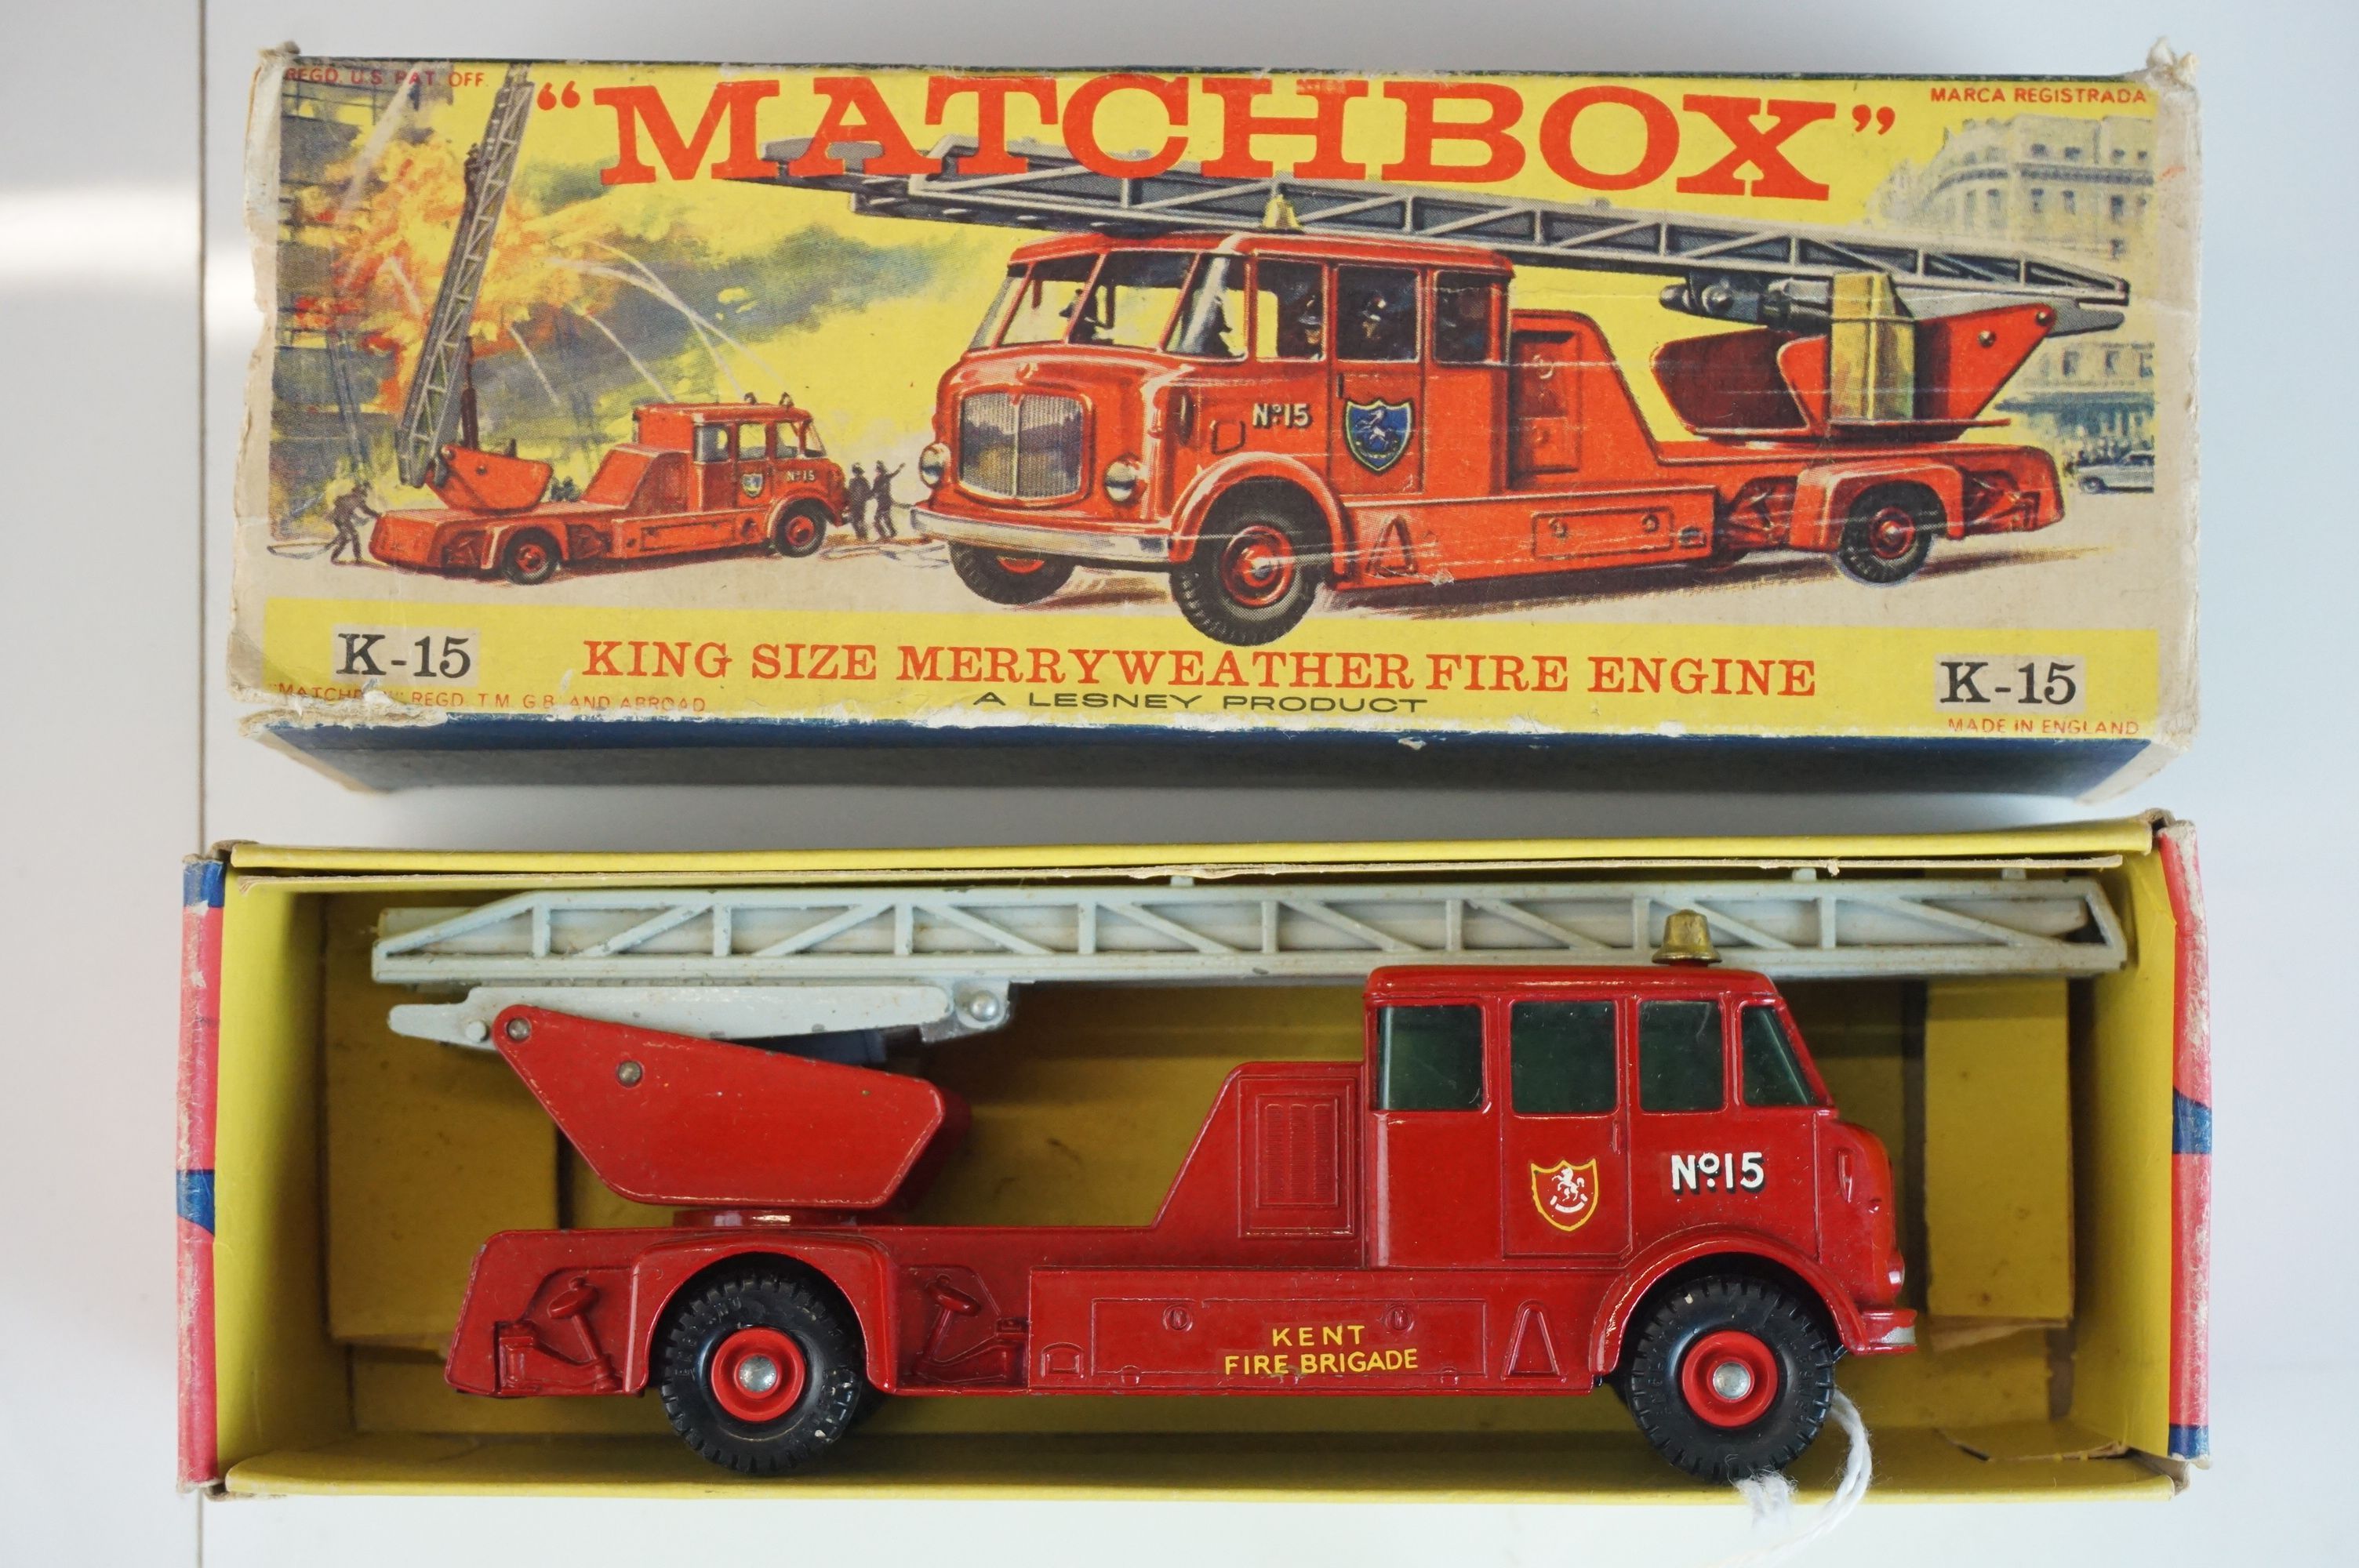 Boxed Matchbox K15 King Size Merryweather Fire Engine diecast model in vg condition with minimal - Image 8 of 8